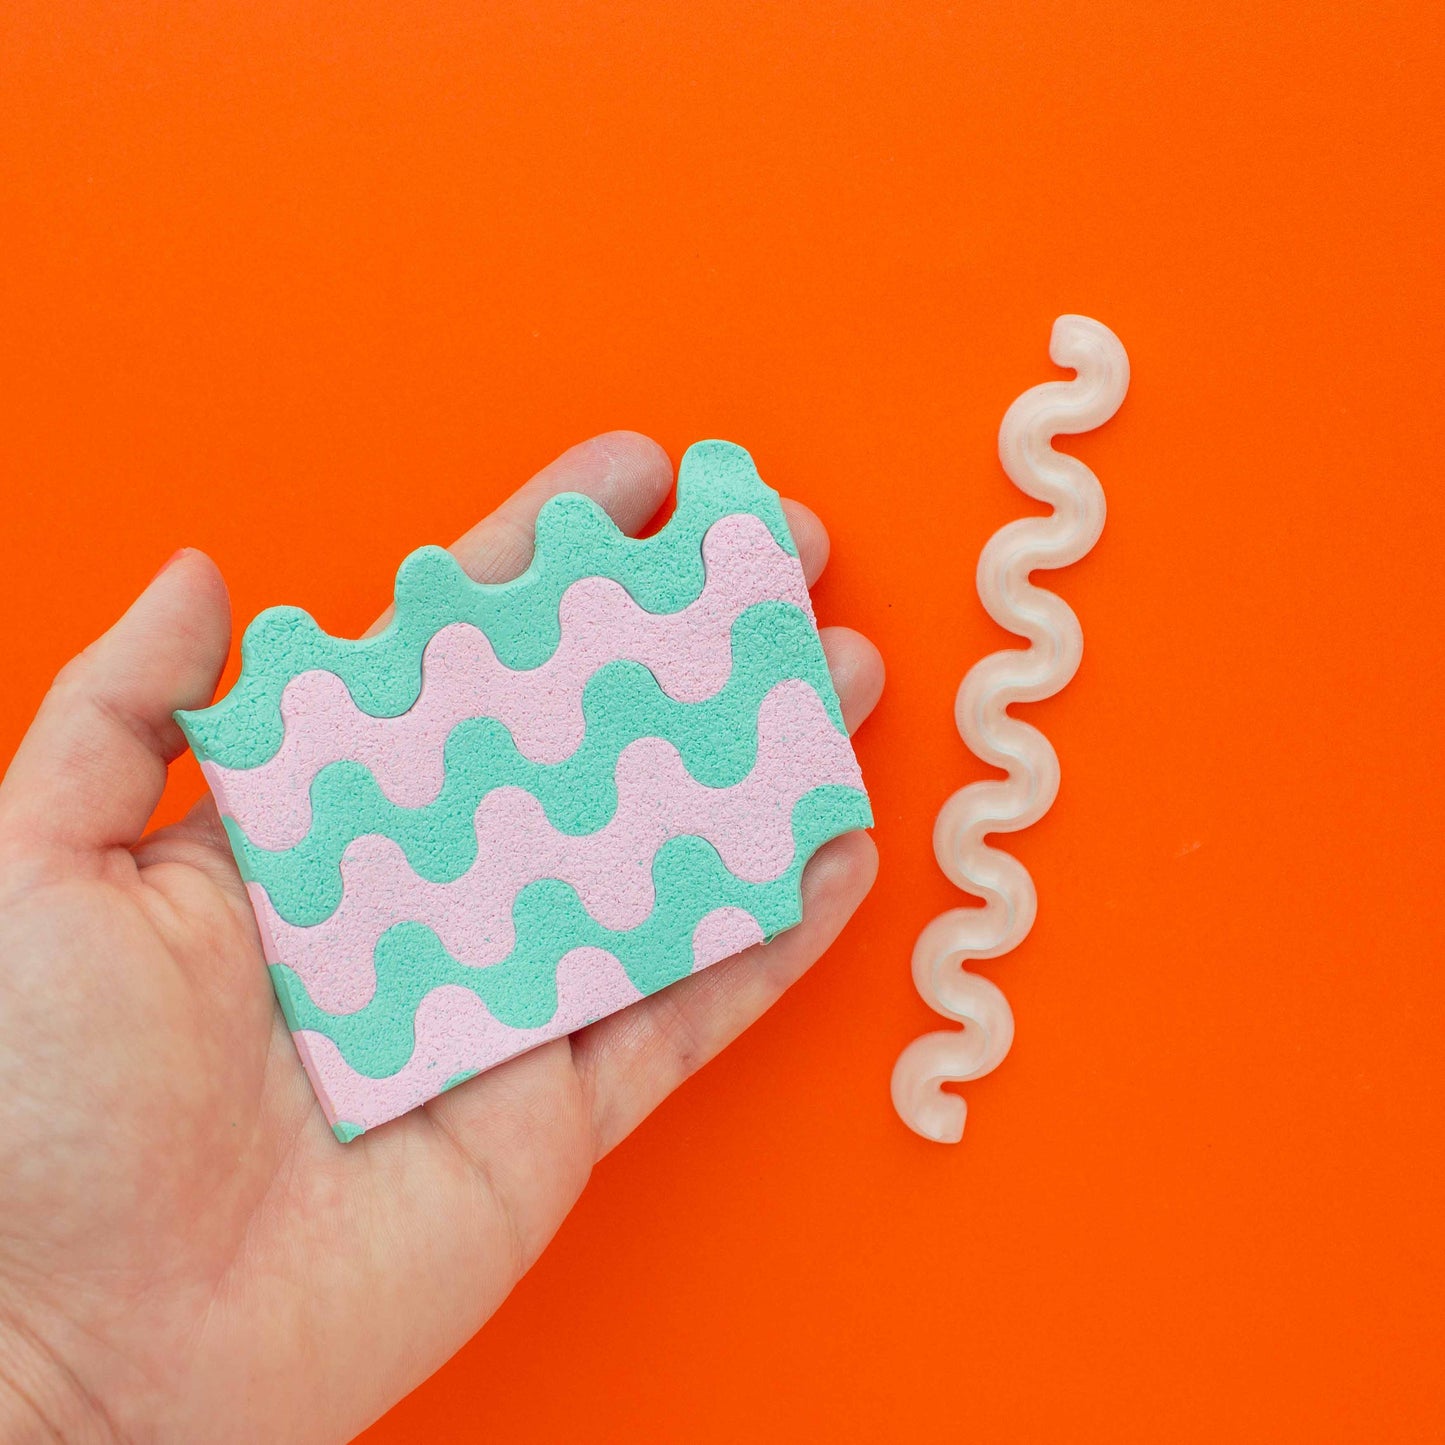 colorful wiggly polymer clay slab in a hand and 1 wiggle blade in an orange background